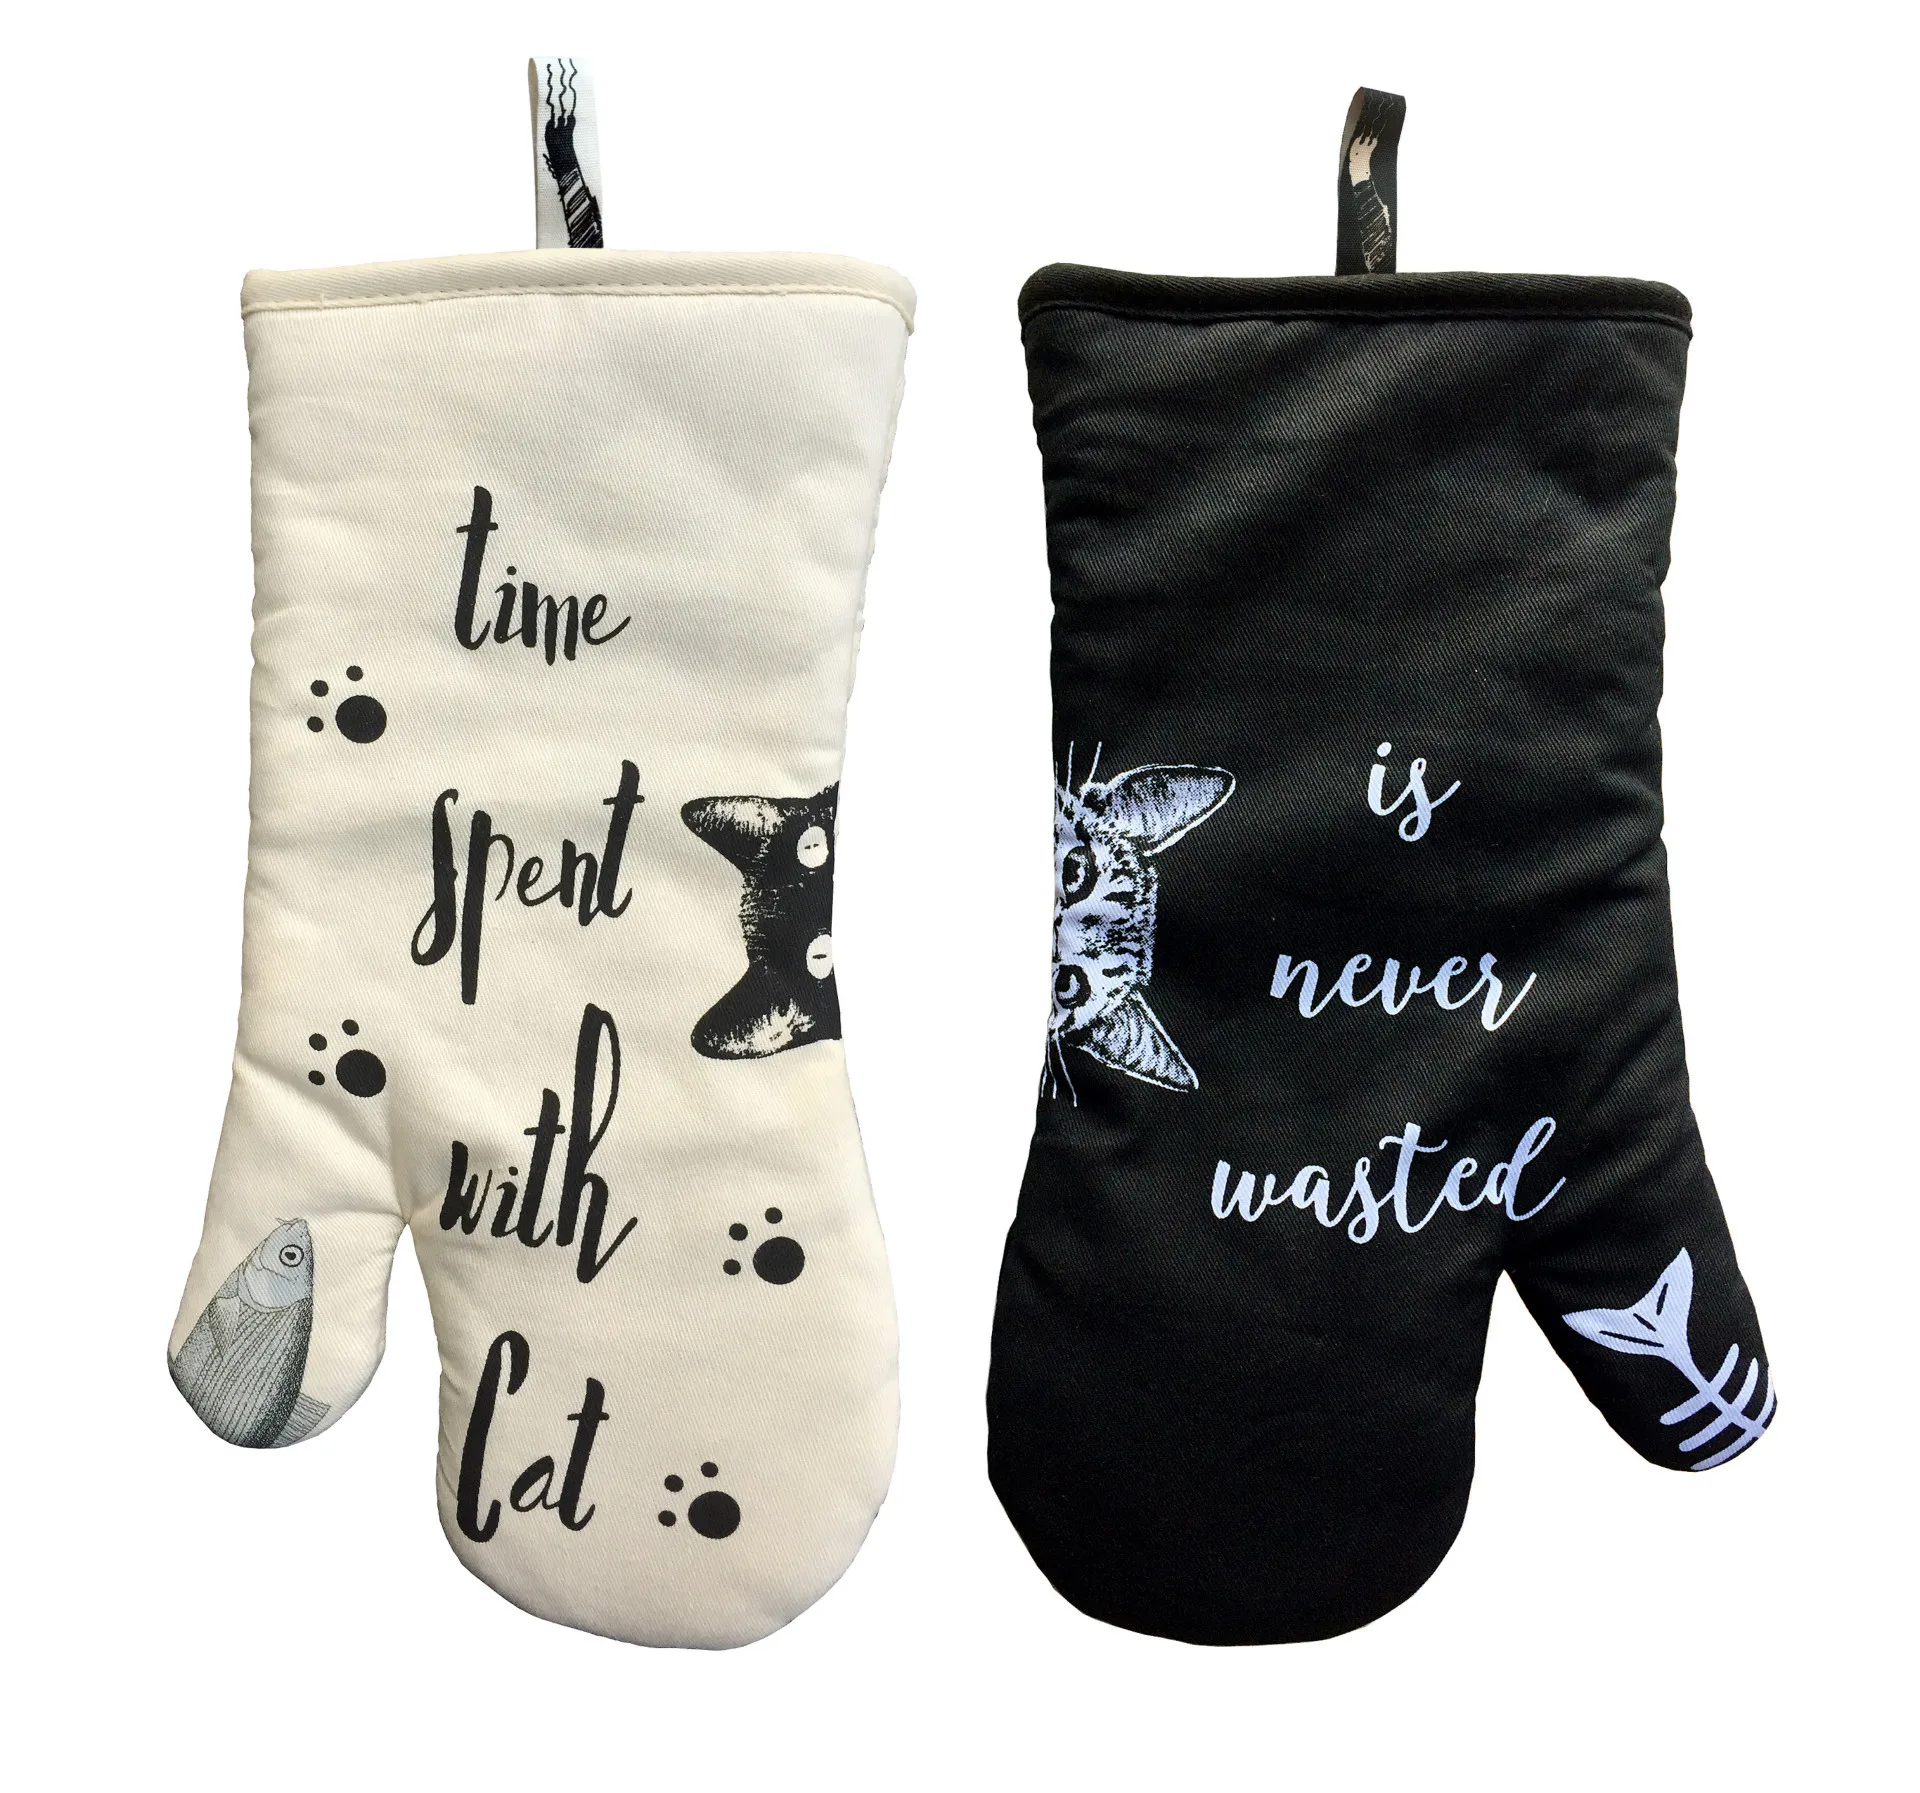 1 Pair 100% Oven Mitts Cotton Lining Heat Resistant Cooking Glove Potholder Kitchen Gloves (Ivory and Black Cat)